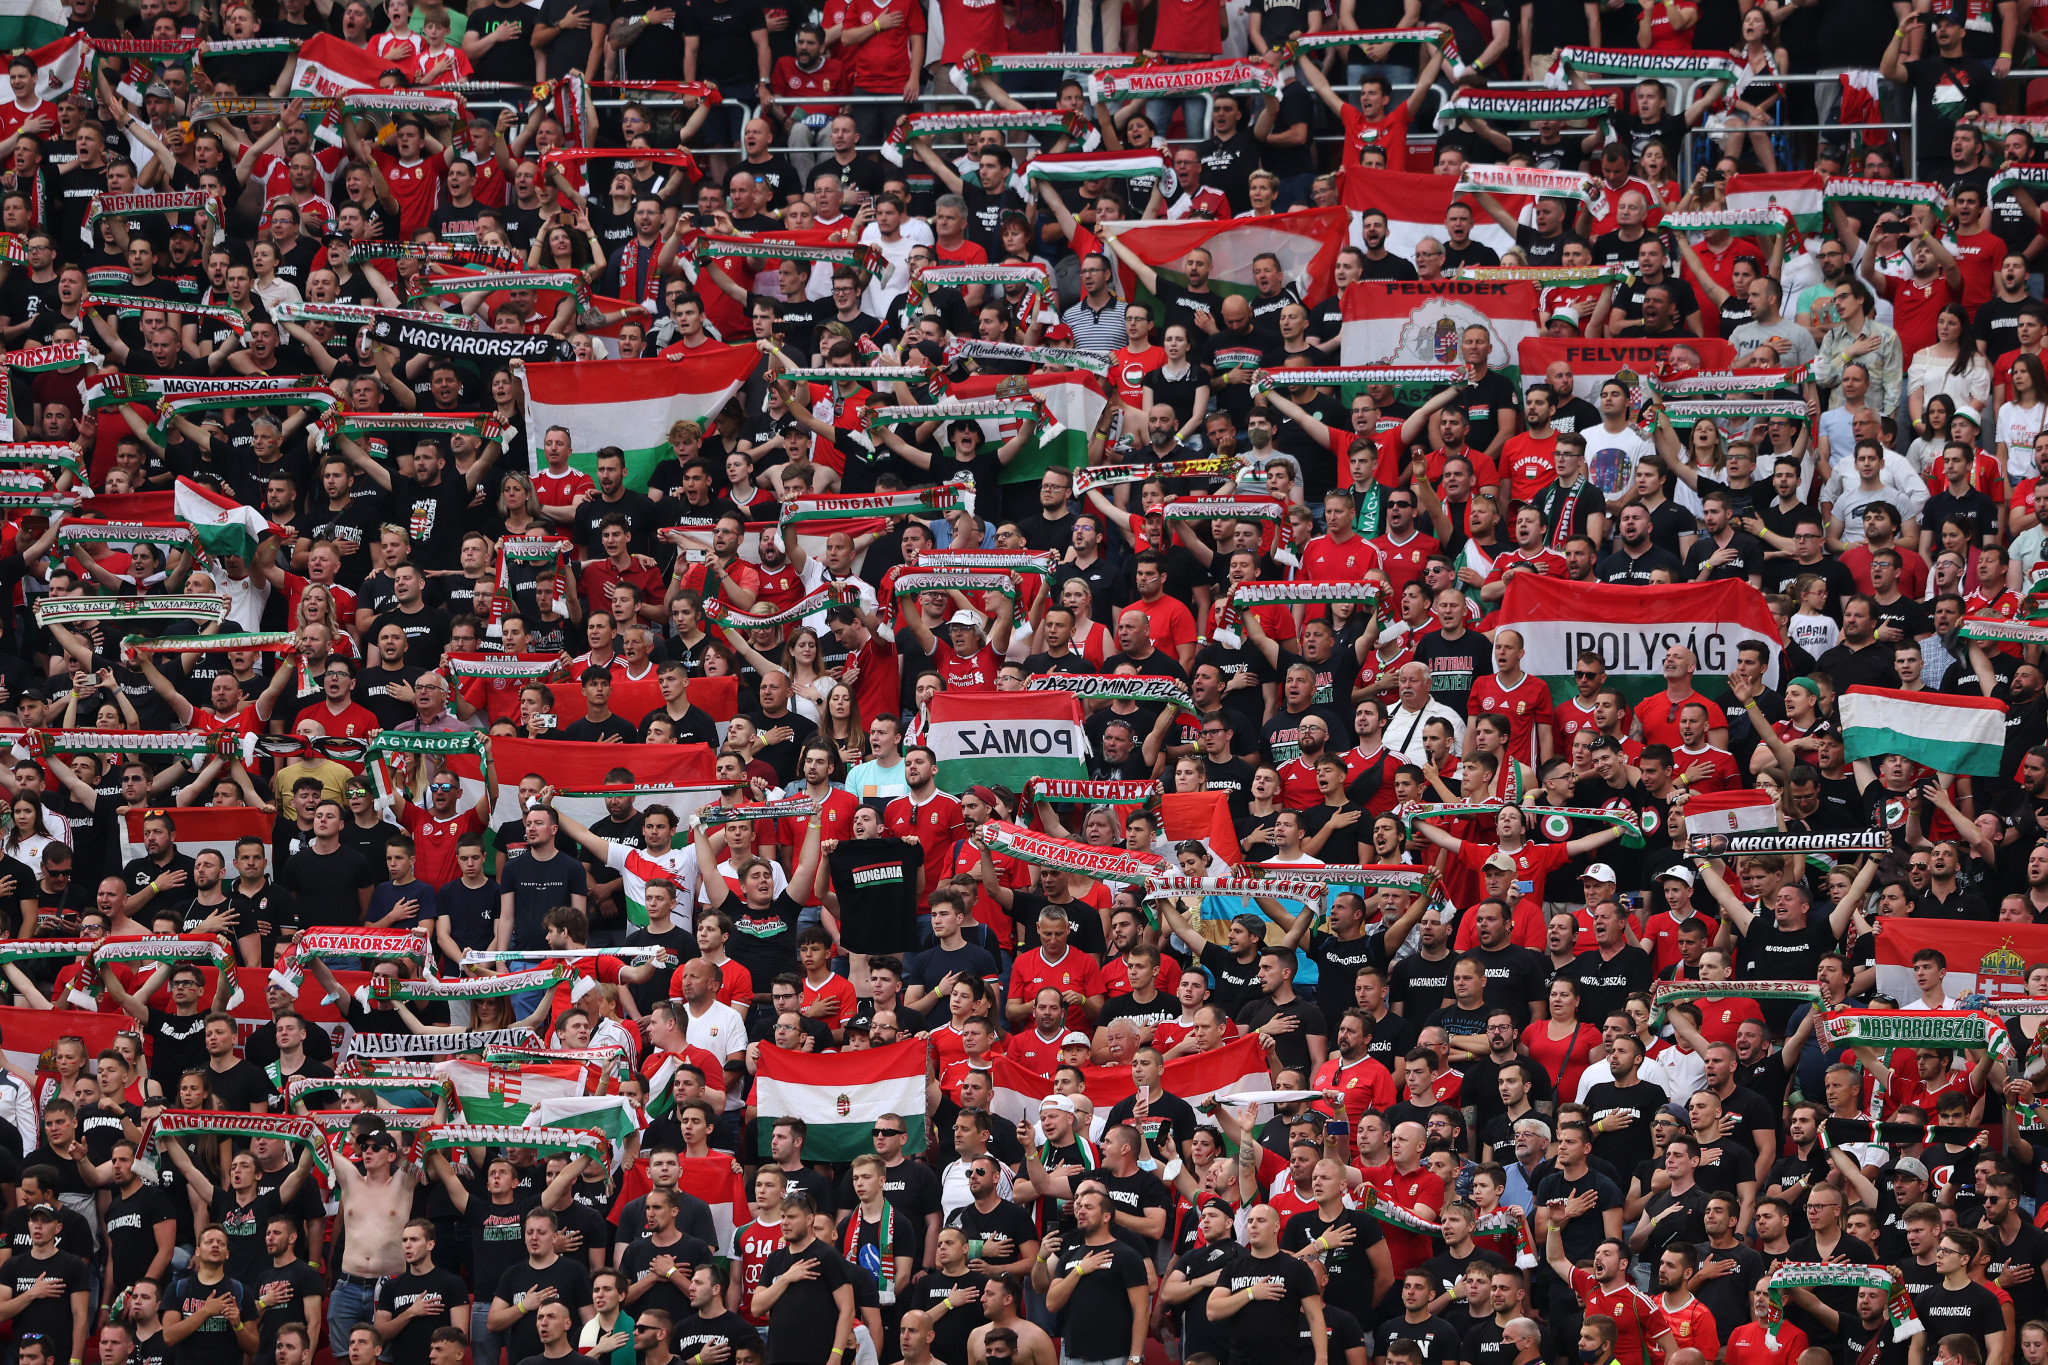 Hungary will not have fans at their next two UEFA-sanctioned matches after UEFA found their fans guilty of homophobia and racism during Euro 2020 ©Getty Images